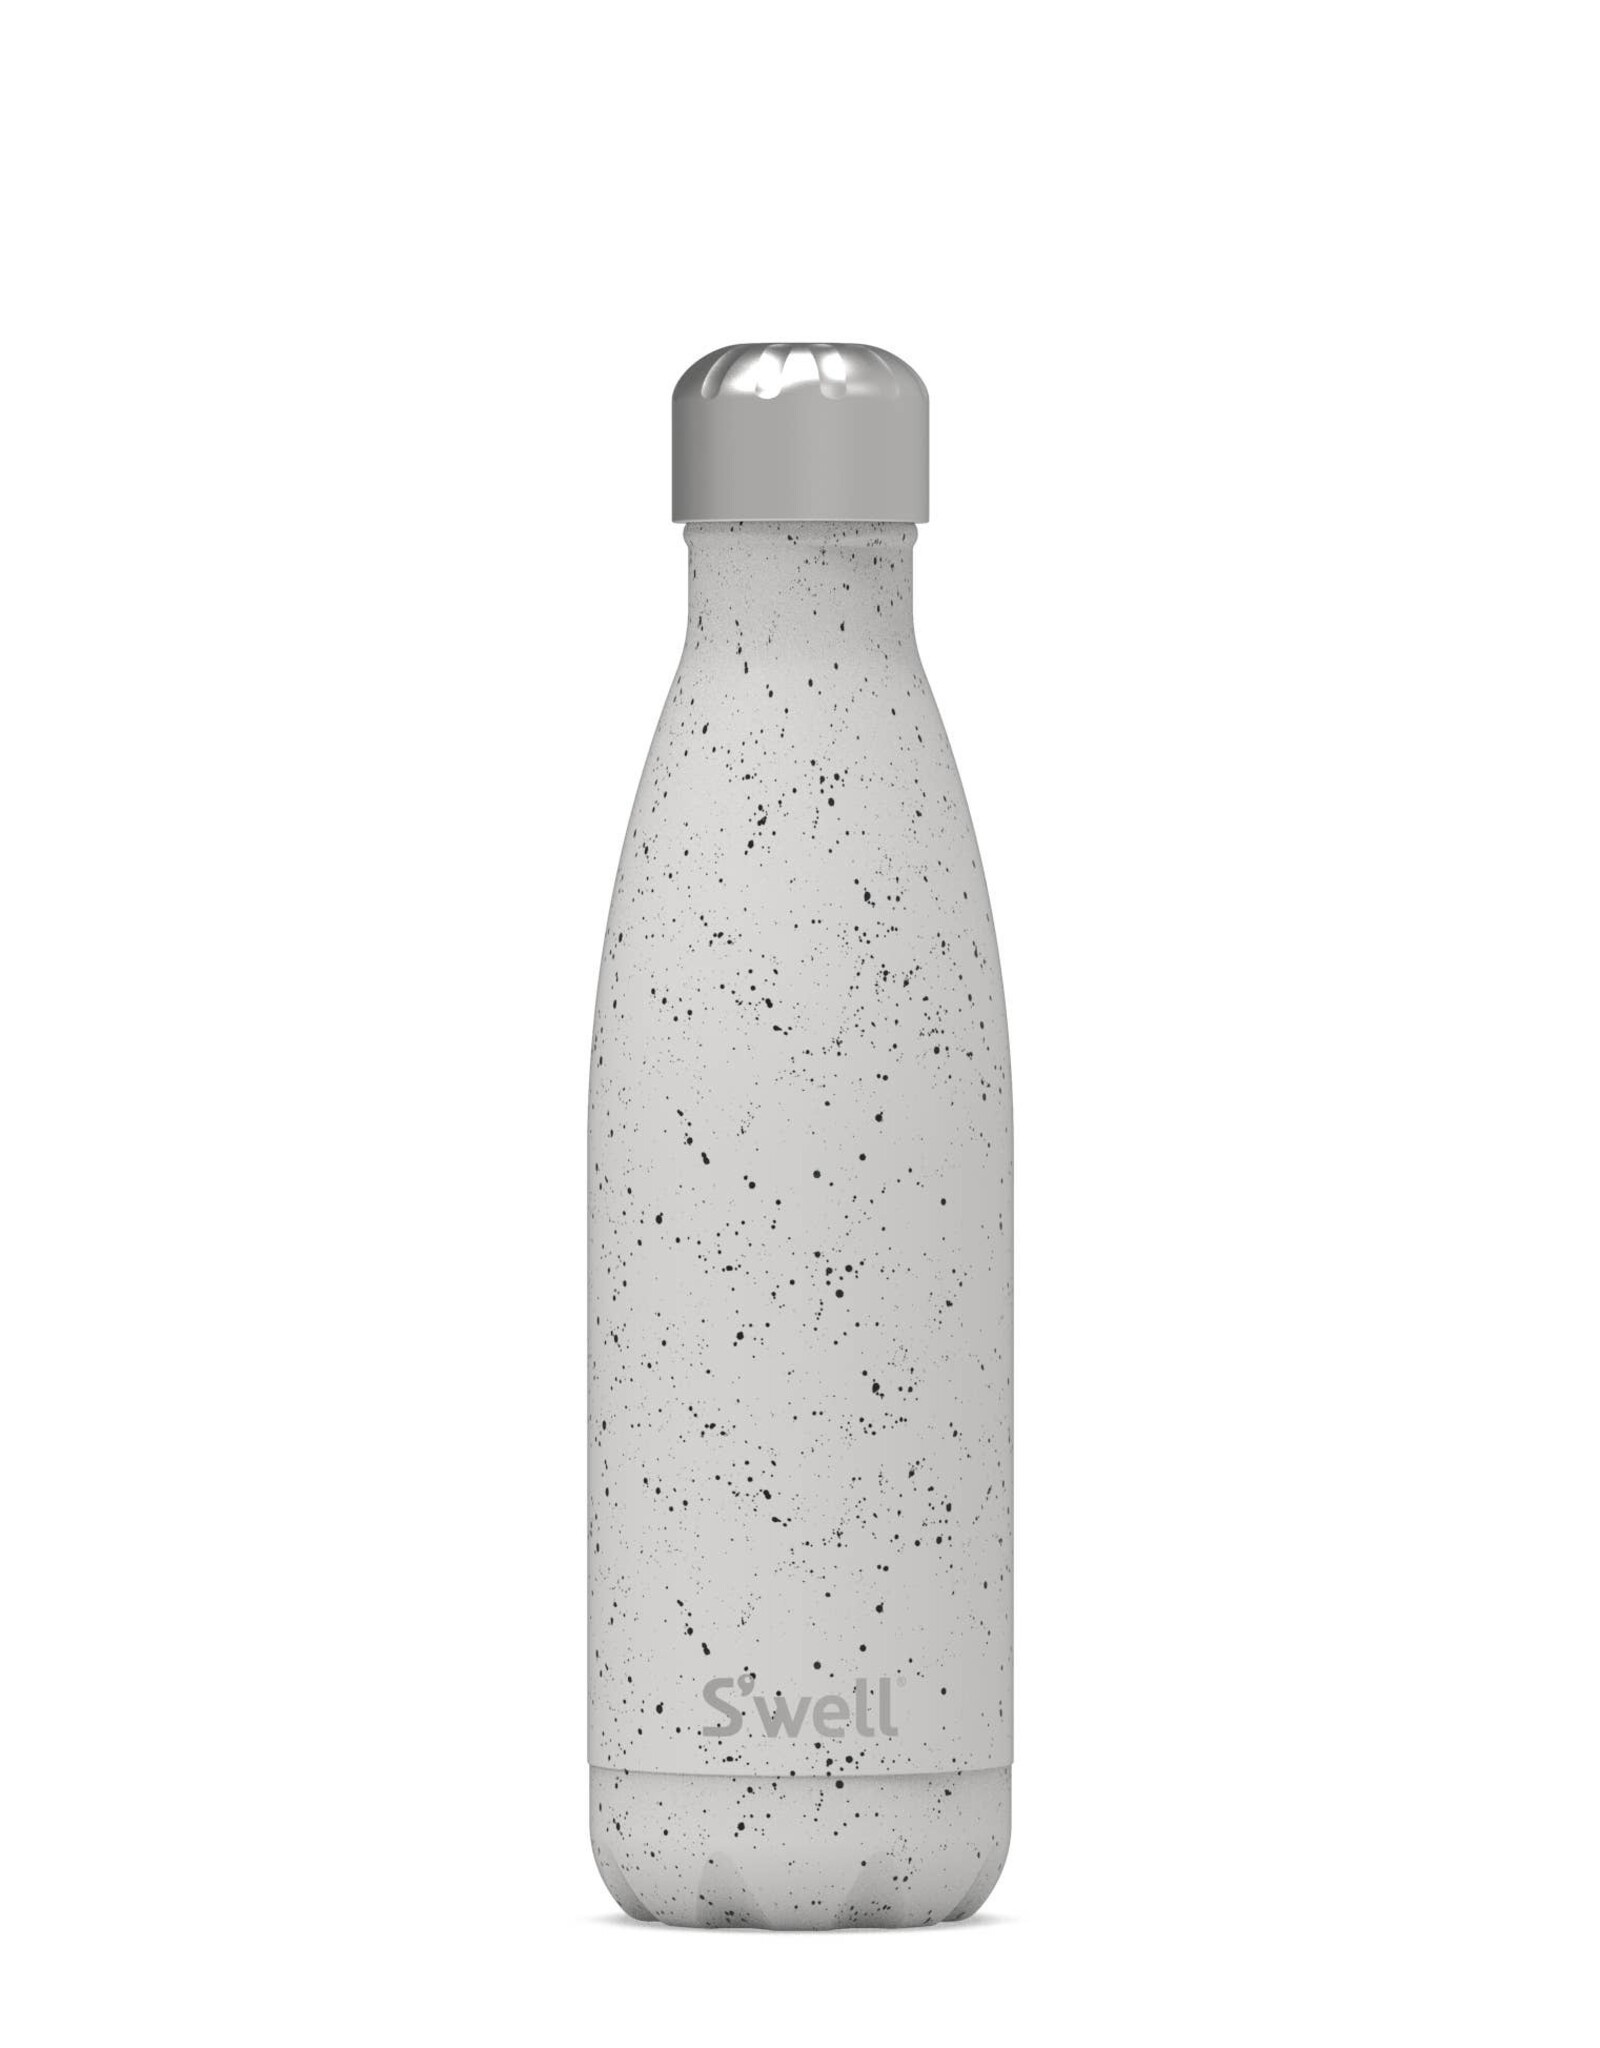 S'well S'well Bottle - Speckled Moon 17oz